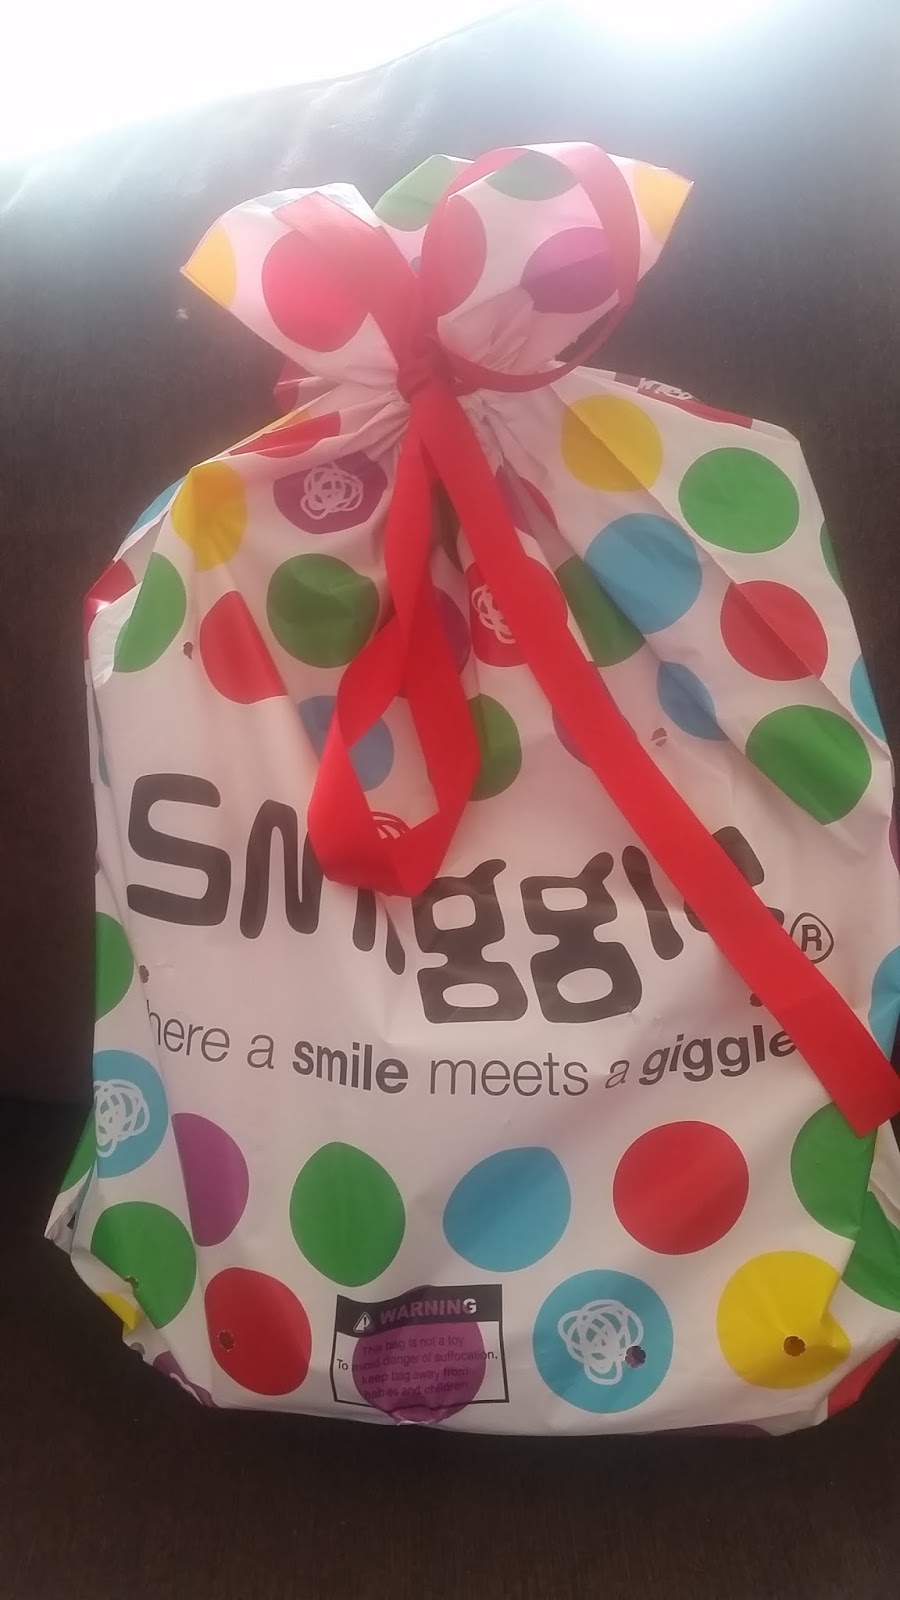 Where A Smile Meets A Giggle; A Fun Day Out At Smiggle